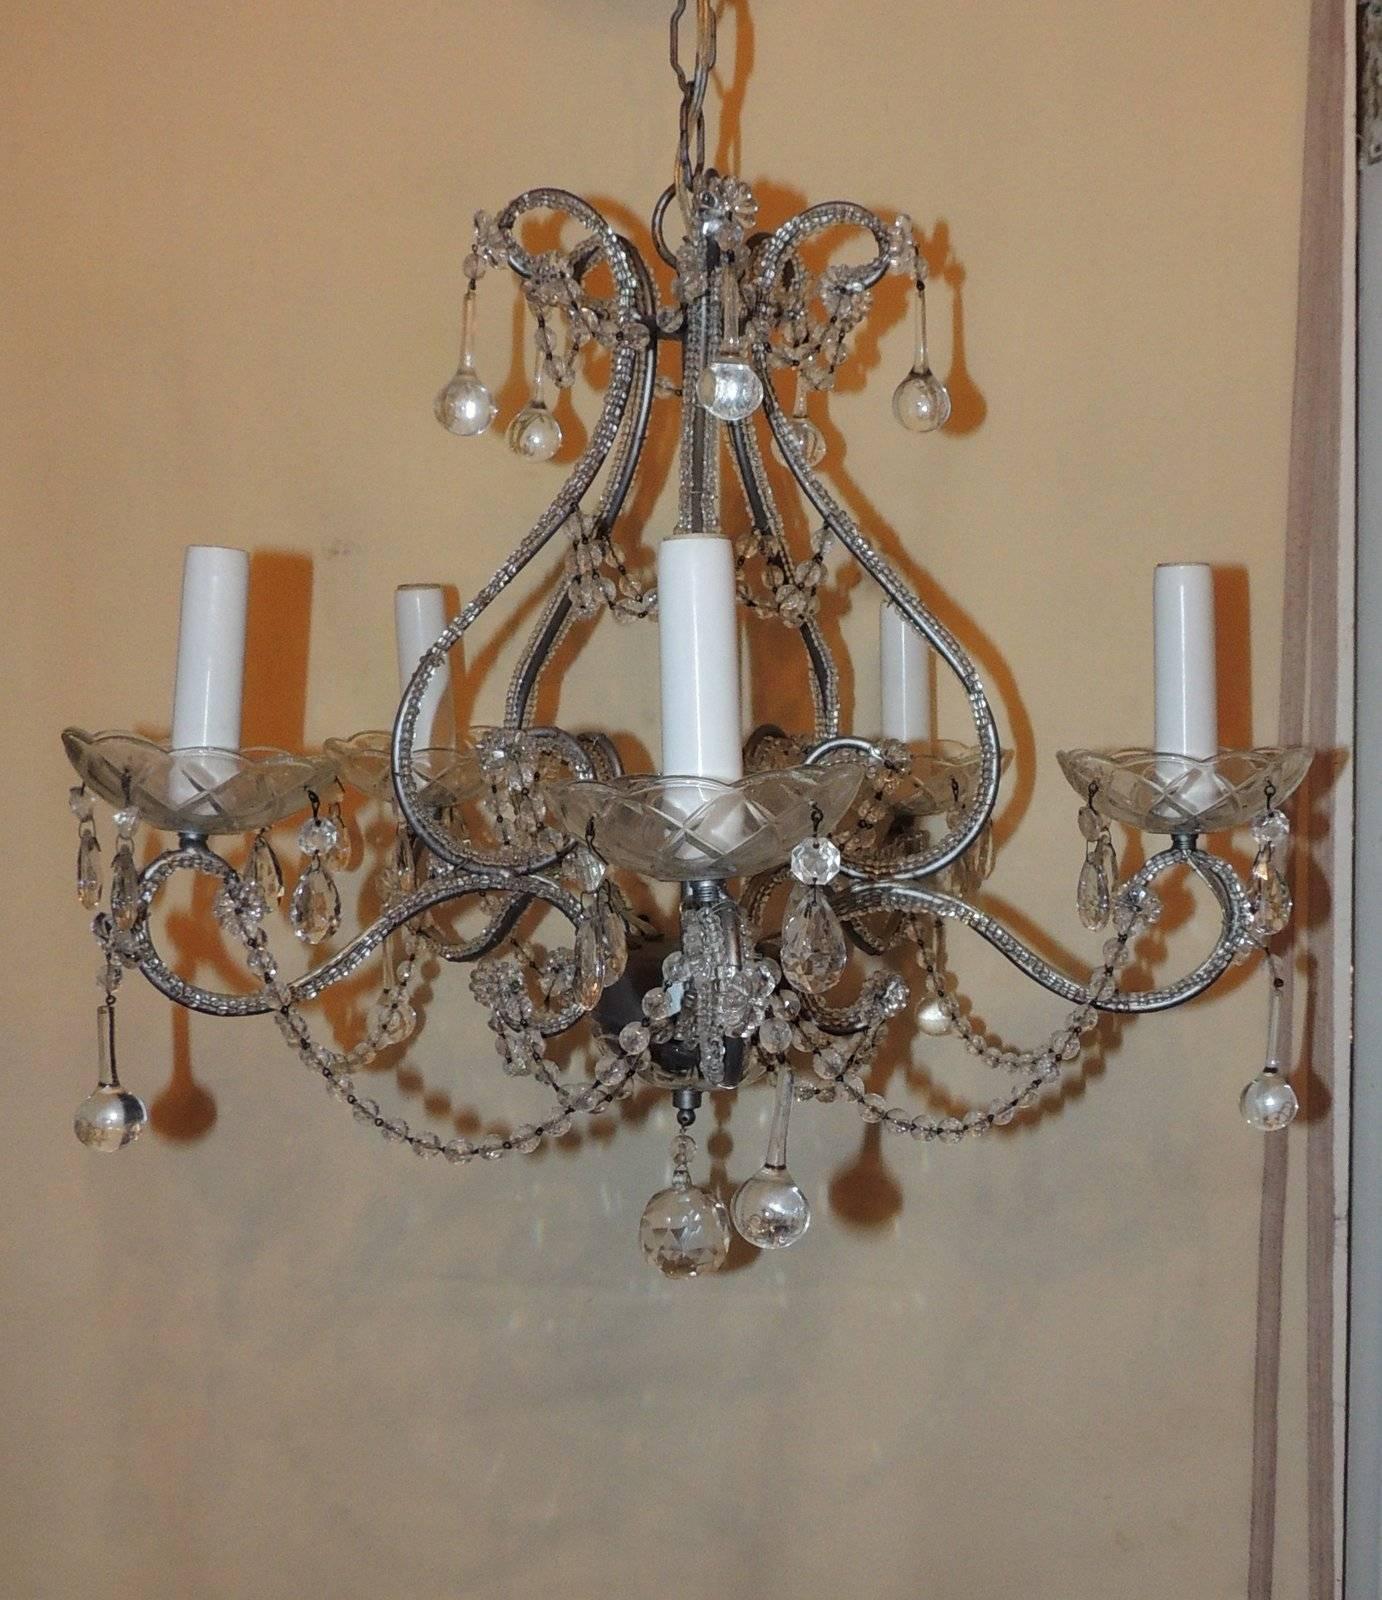 Perfect for the smaller space, this petite Bagues style five-light chandelier has crystal beads trimming the body, draped bead chains and crystal drops accenting the chandelier.

Measures: 16" H x 18" W.